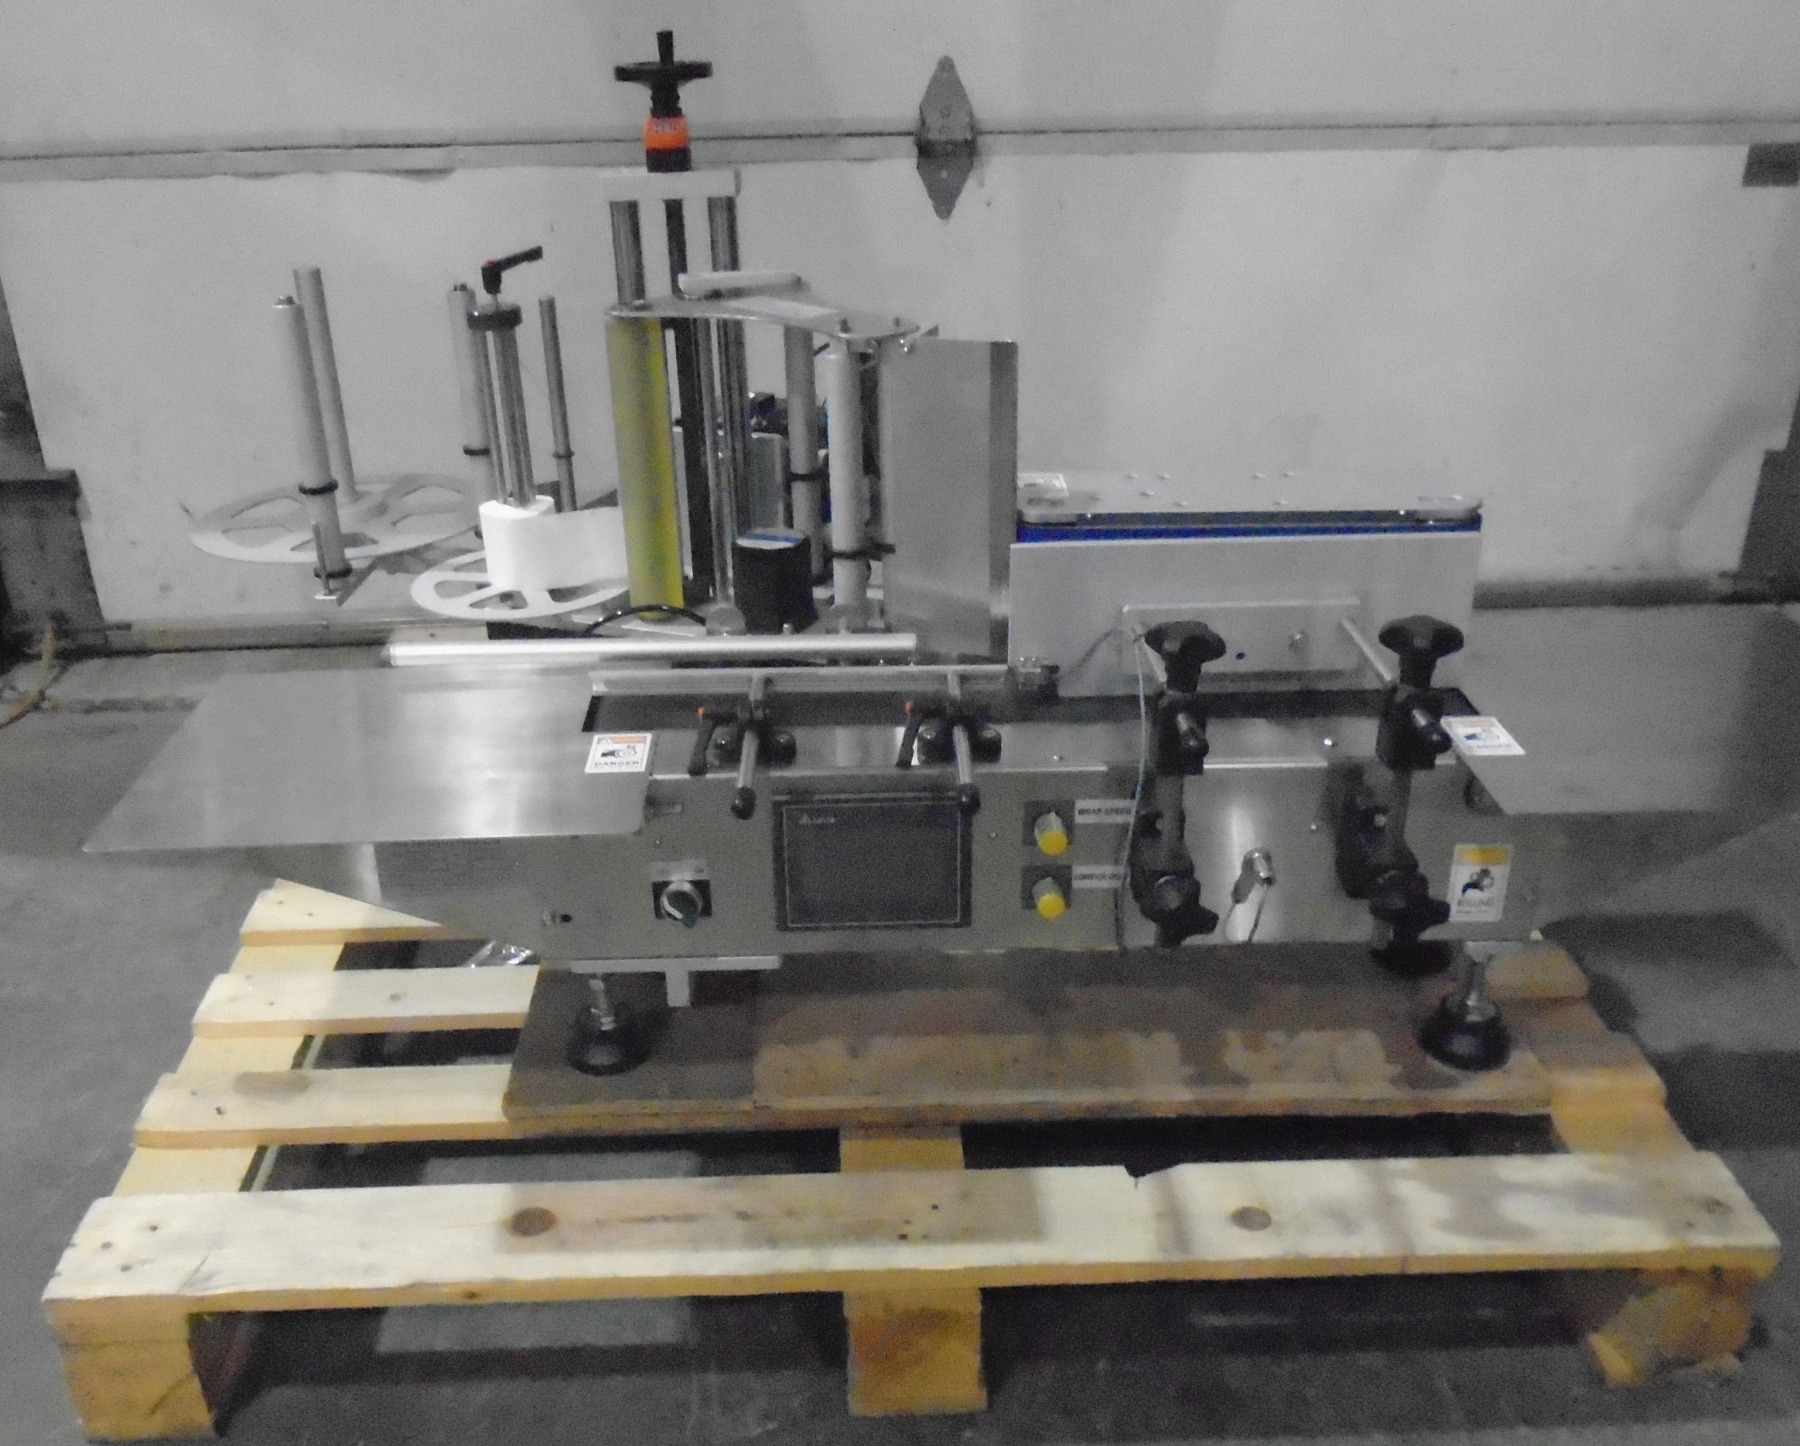 Used Model-1 Tabletop Wraparound Labeler with an Easyrun Controls and Hot Stamp Coder